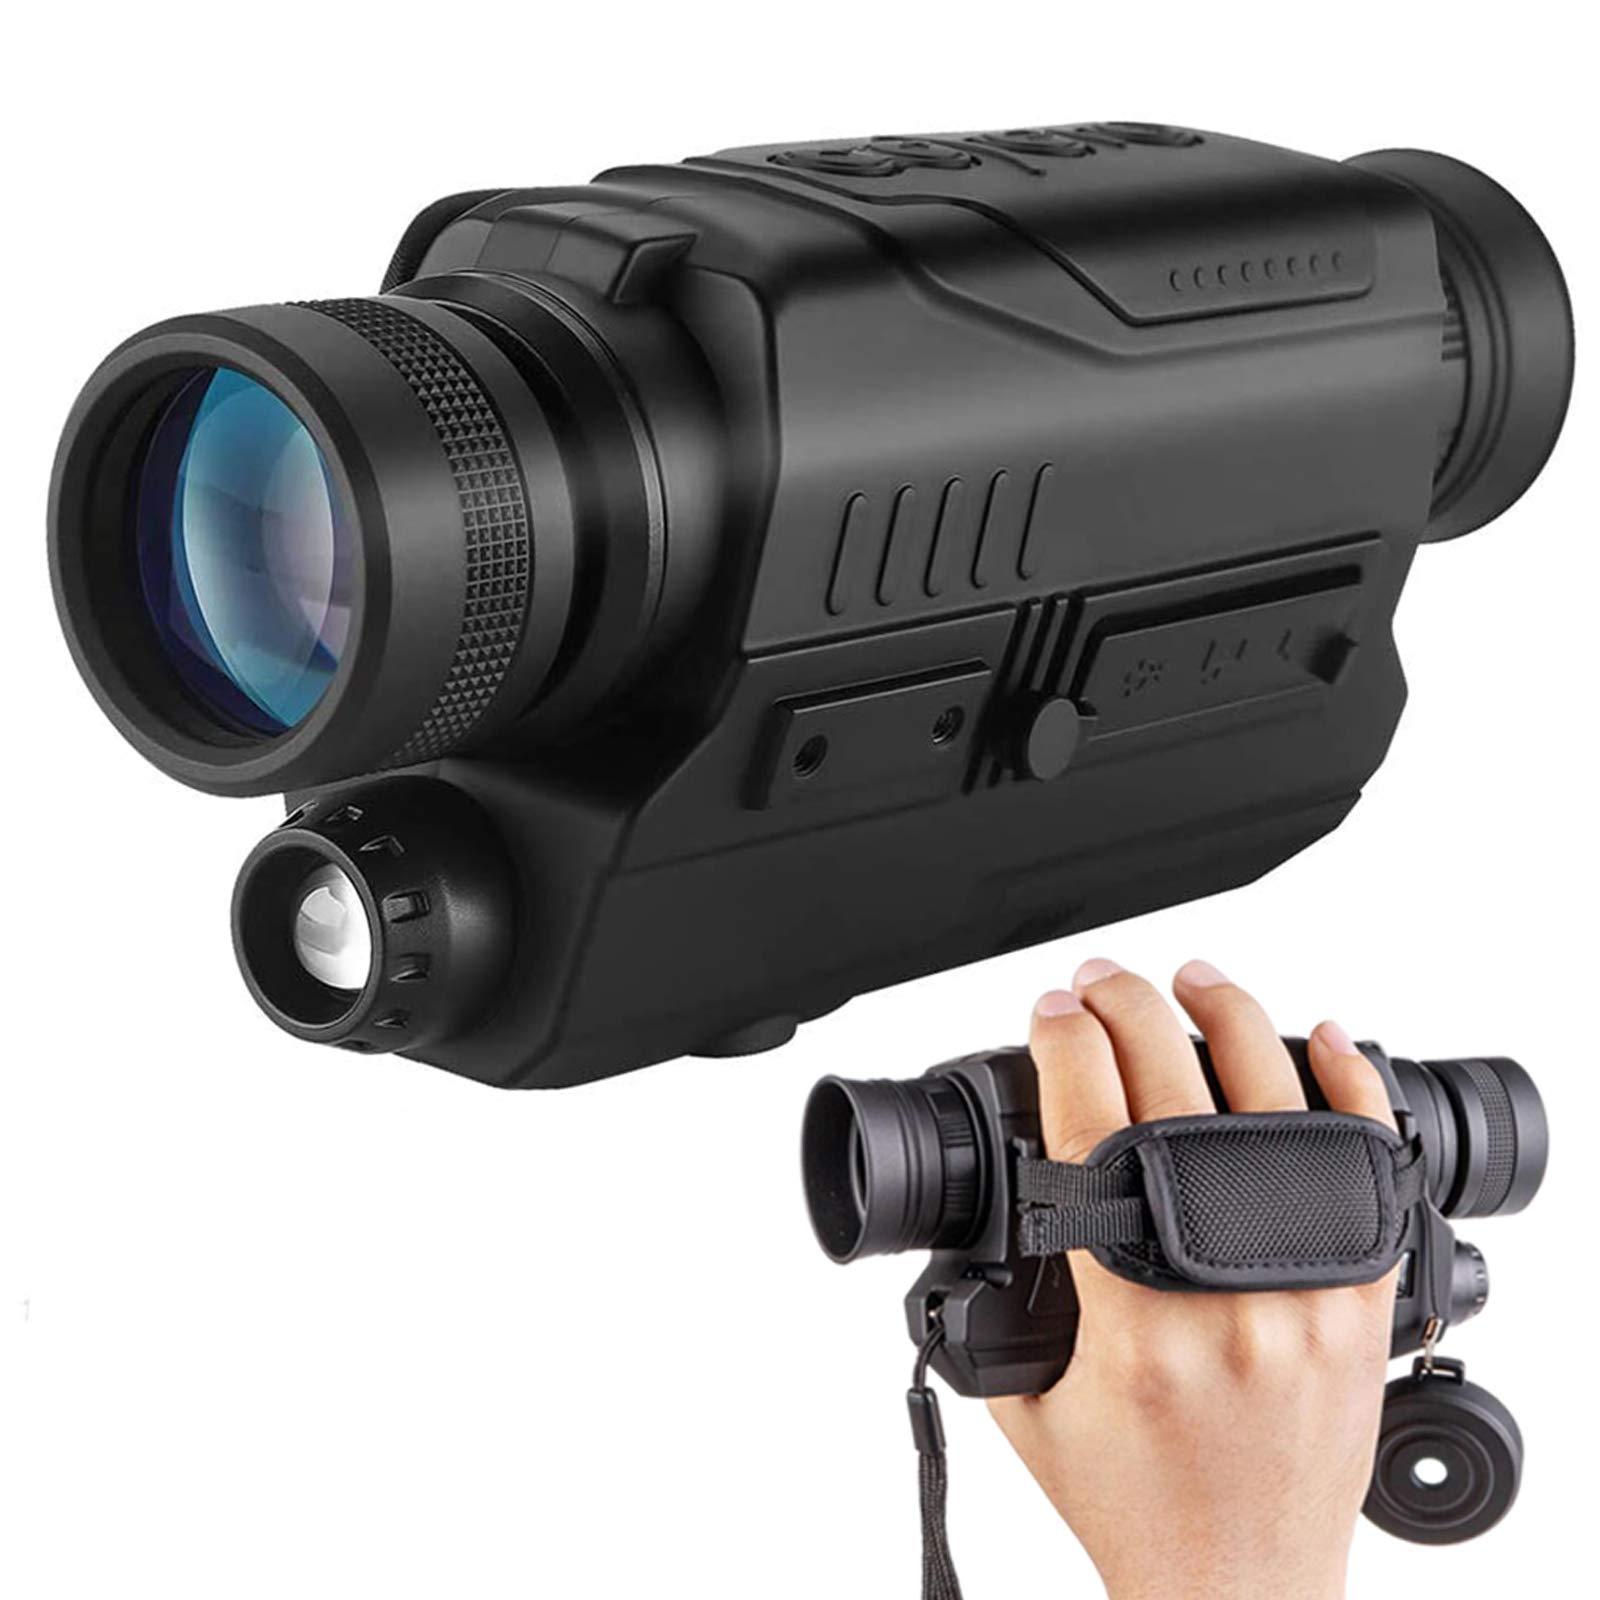 Digital Night Vision Monocular With Infrared Illuminator & Video Recording,  200M Long Distance, HD Night Vision Goggles Binoculars For Hunting,  Camping, Surveillance With 8 GB SD Card